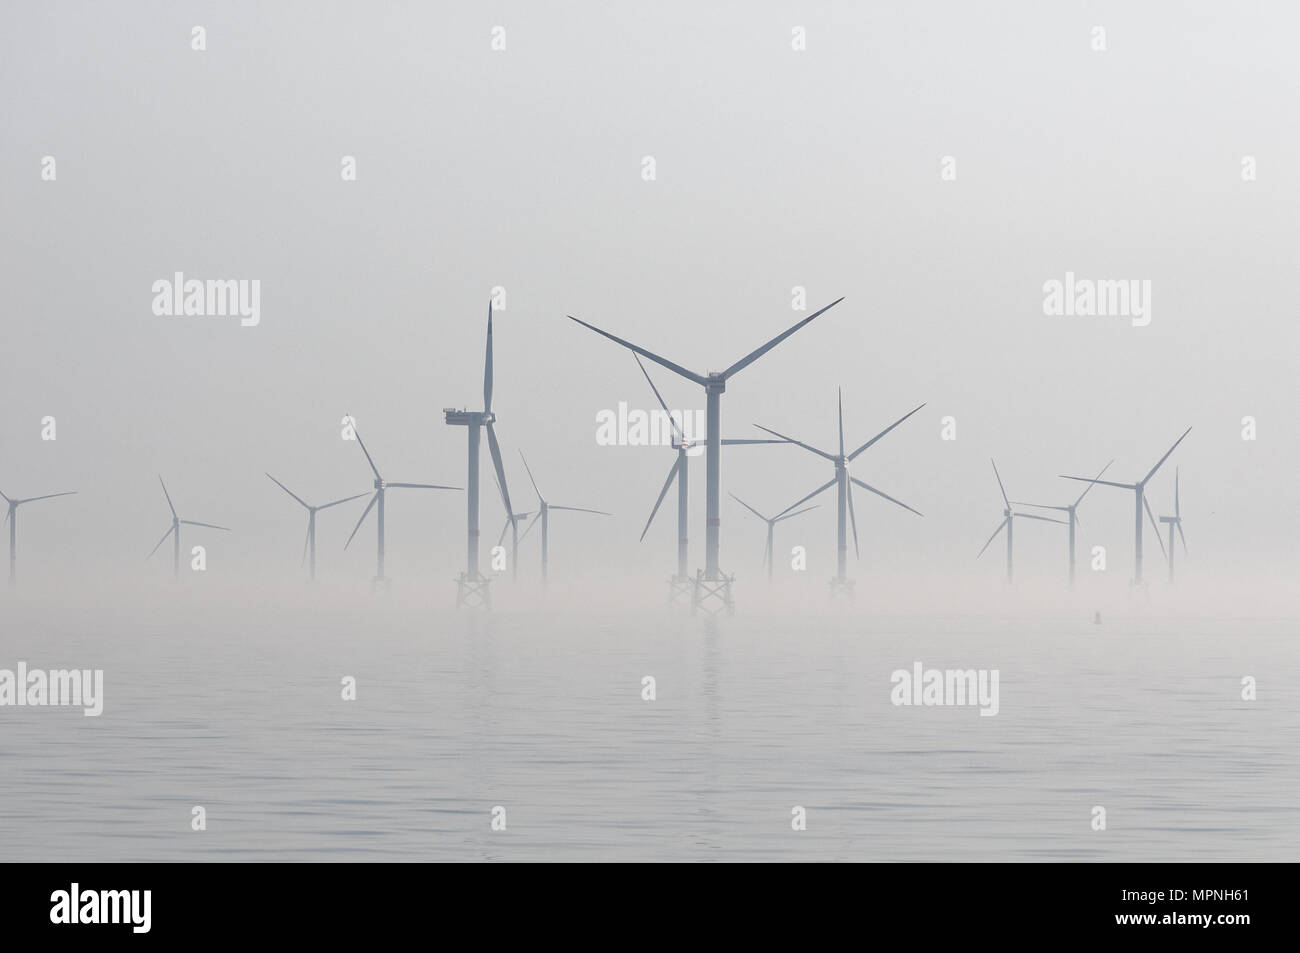 Wind Turbines in the Thornton Bank Phase 2 offshore wind farm in the  Belgian sector of the North Sea Stock Photo - Alamy